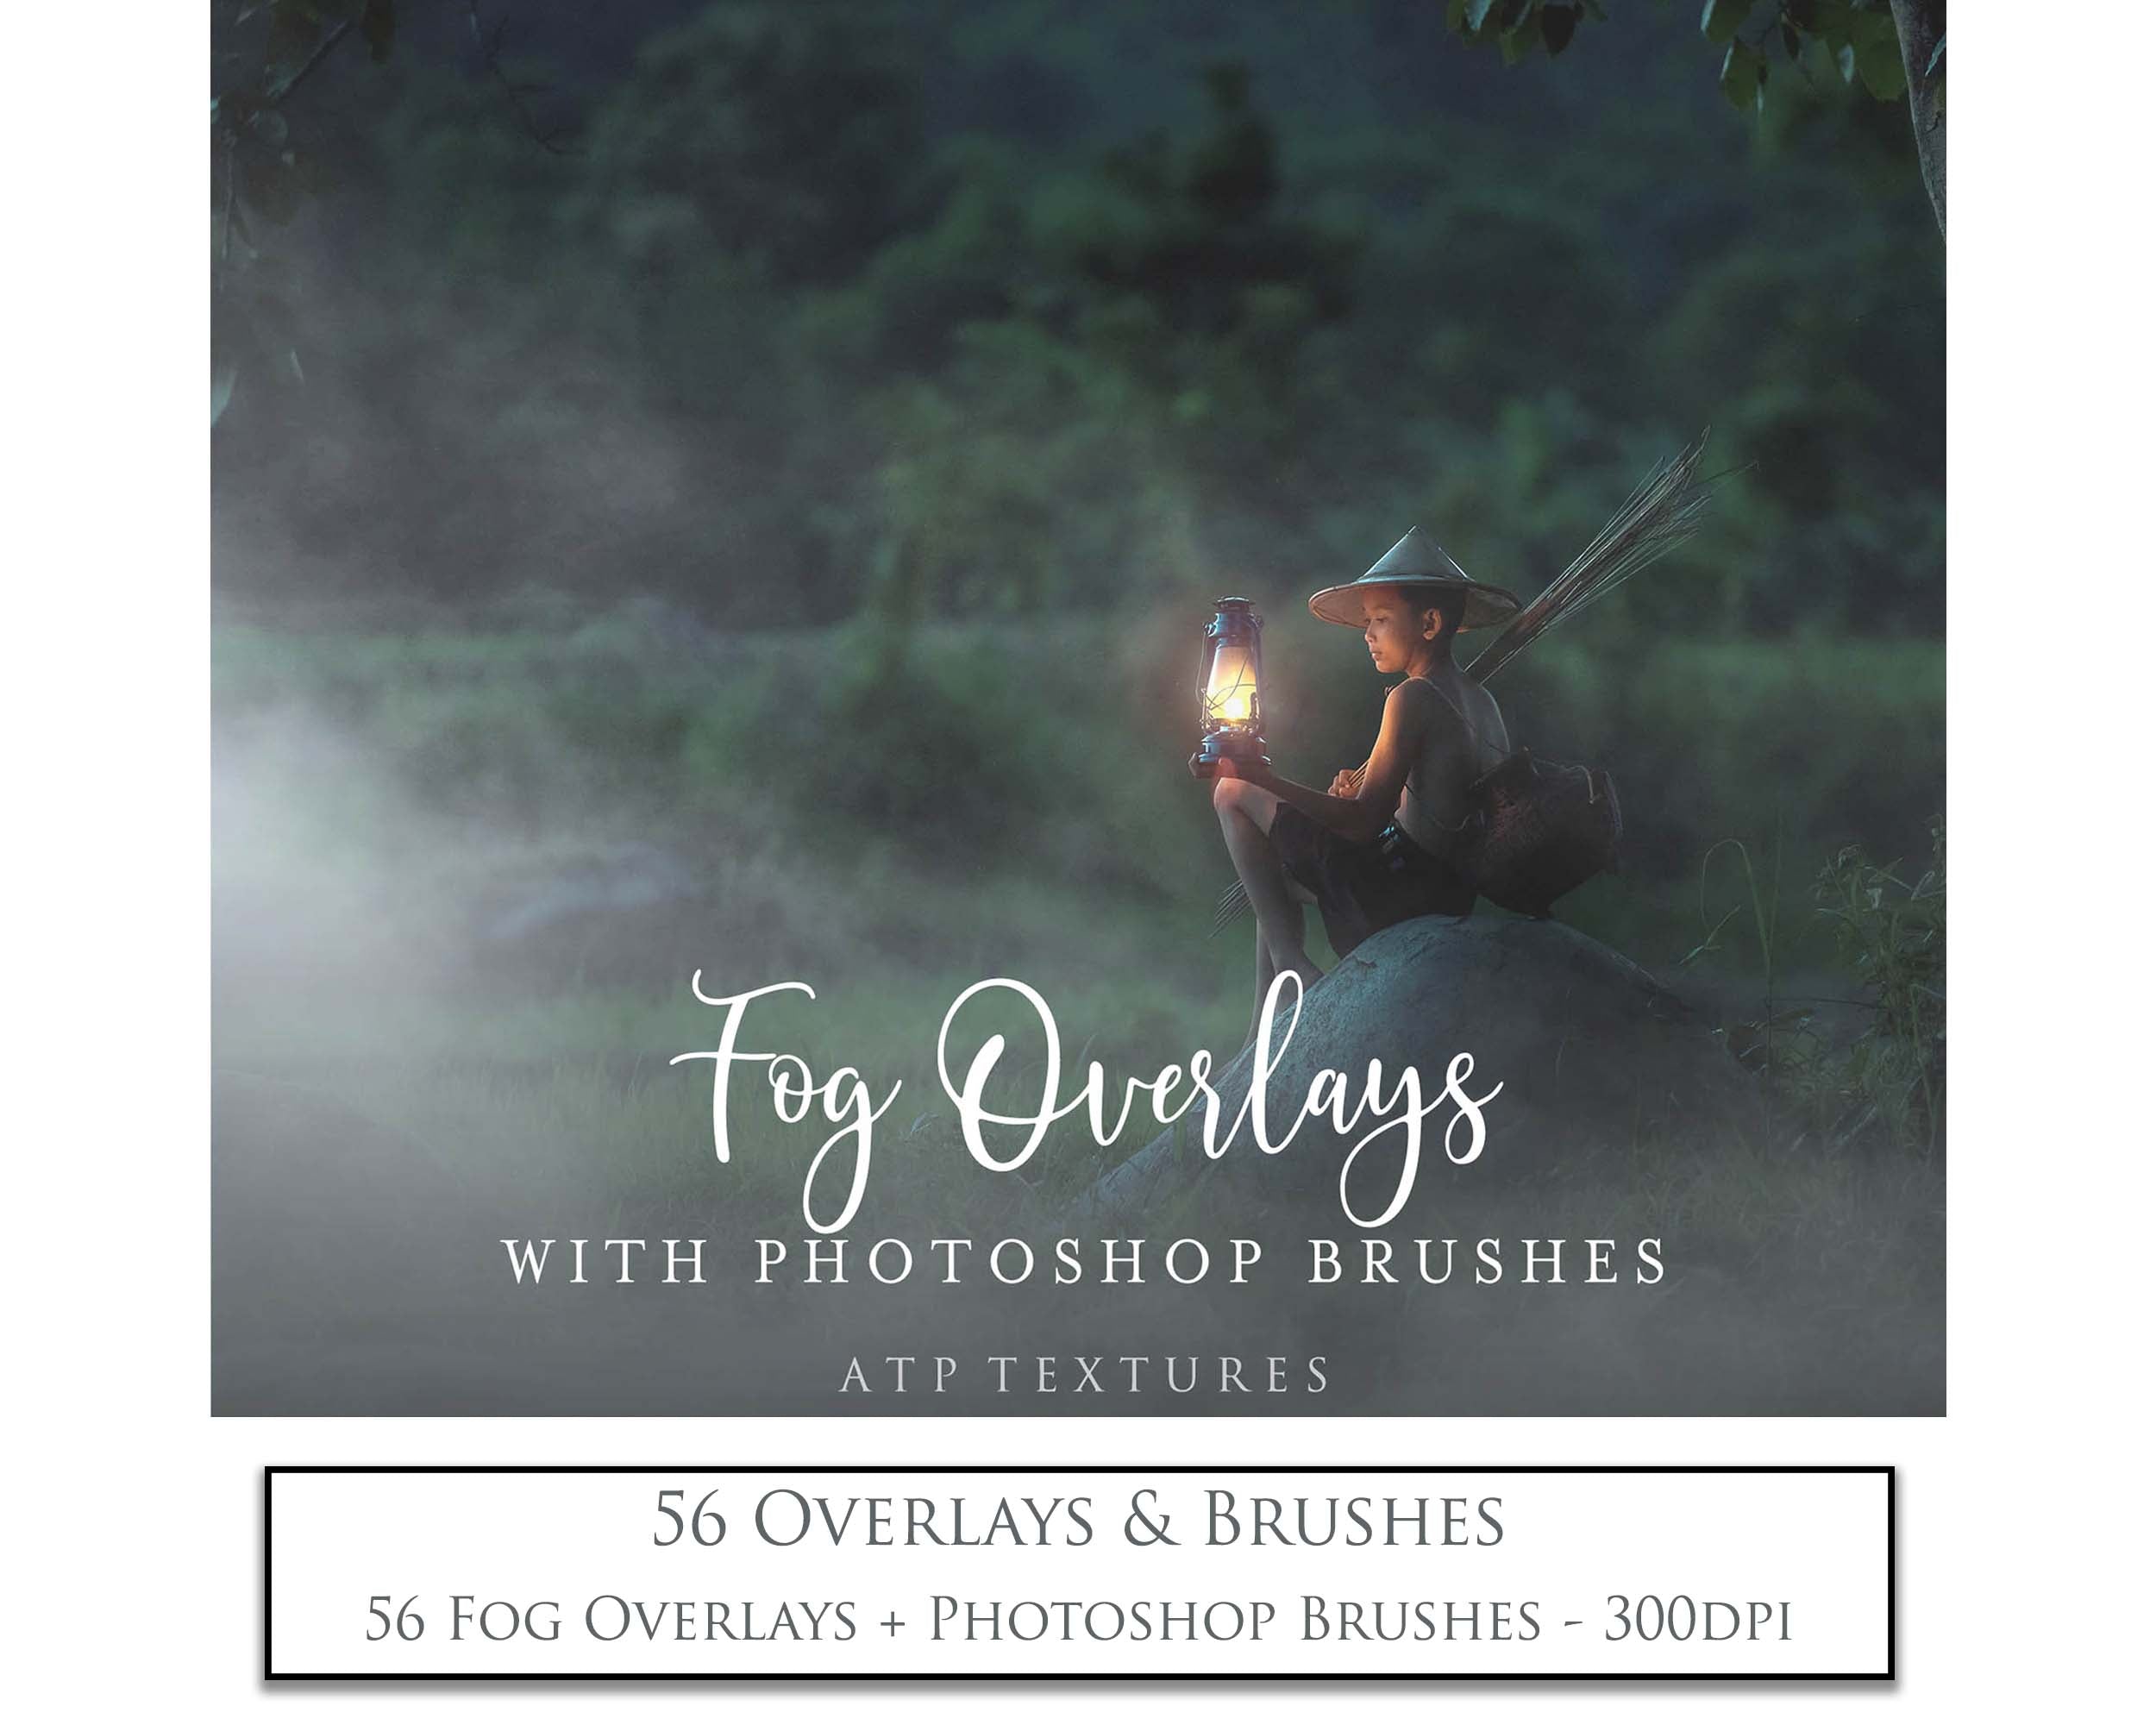 This set of Overlays & Photoshop Brushes includes 56 fog overlays all different and unique! Photoshop brushes with overlays for photography and digital design. Digital Stamps for scrapbooking, photography and graphic design. Realistic photography. Assets and Add ons. High resolution. ATP Textures